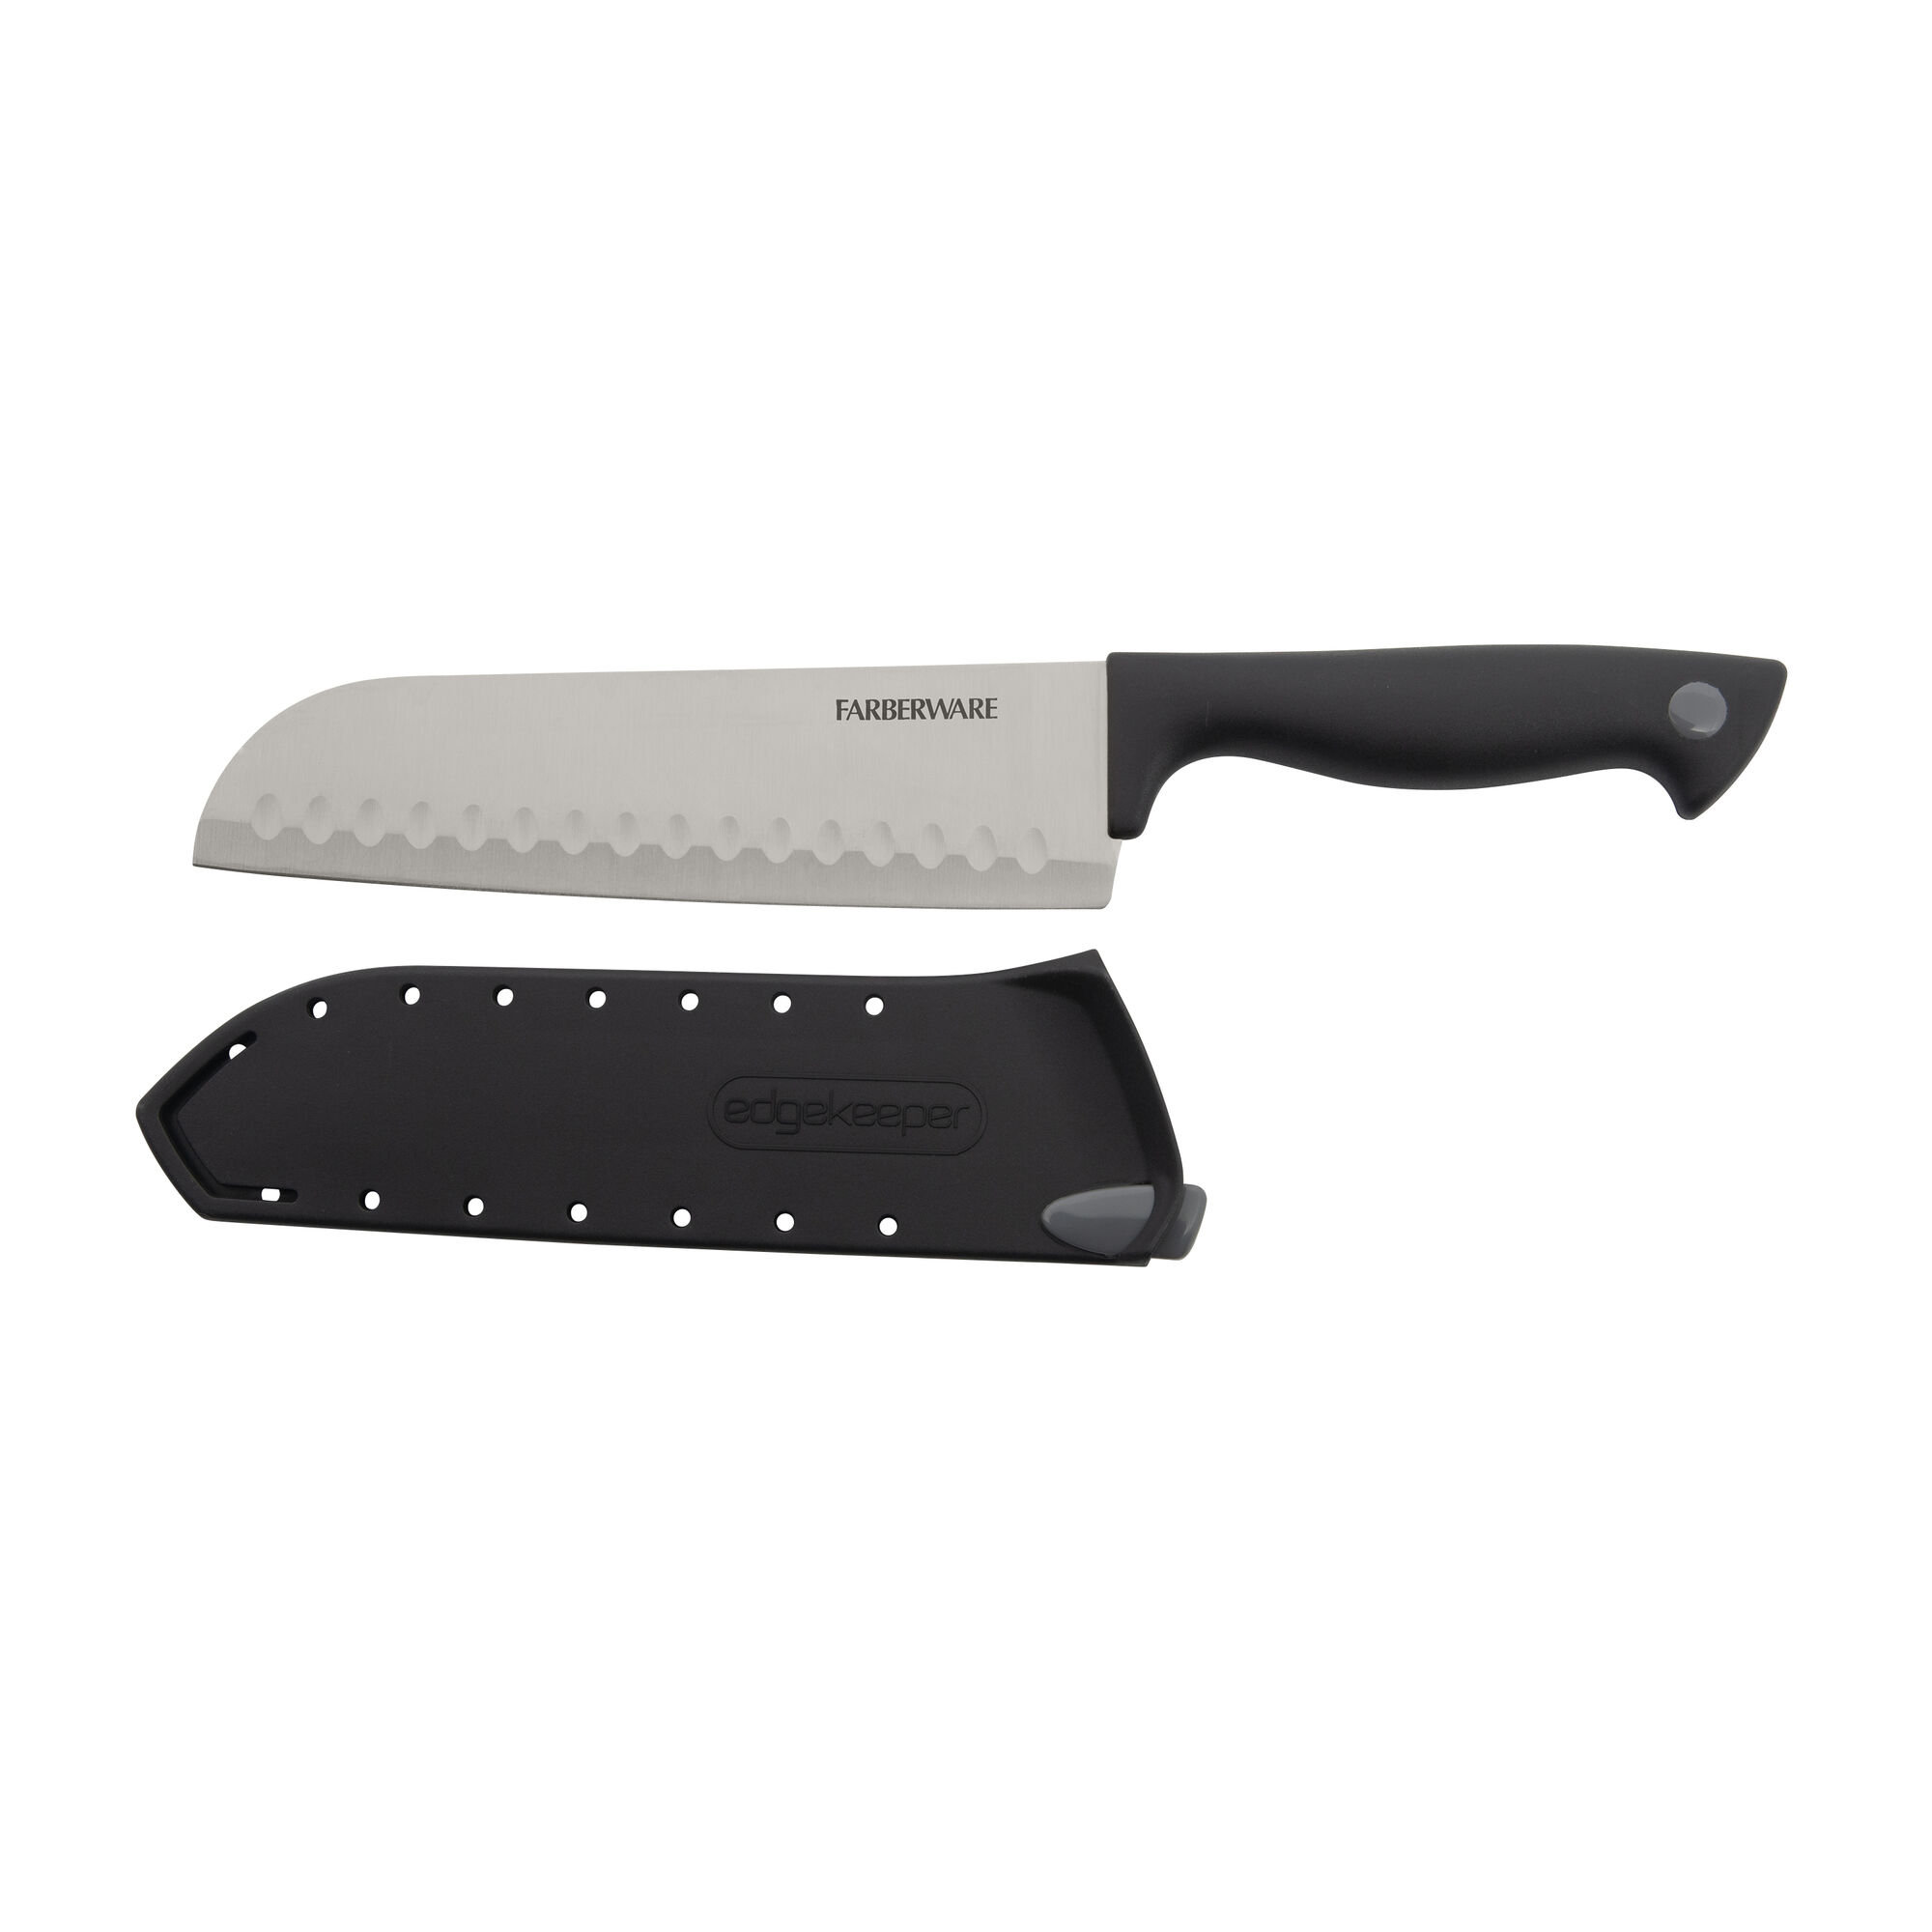 Farberware Edgekeeper 5-Inch Santoku Knife with Self-Sharpening Blade  Cover, High Carbon-Stainless Steel Kitchen Knife with Ergonomic Handle